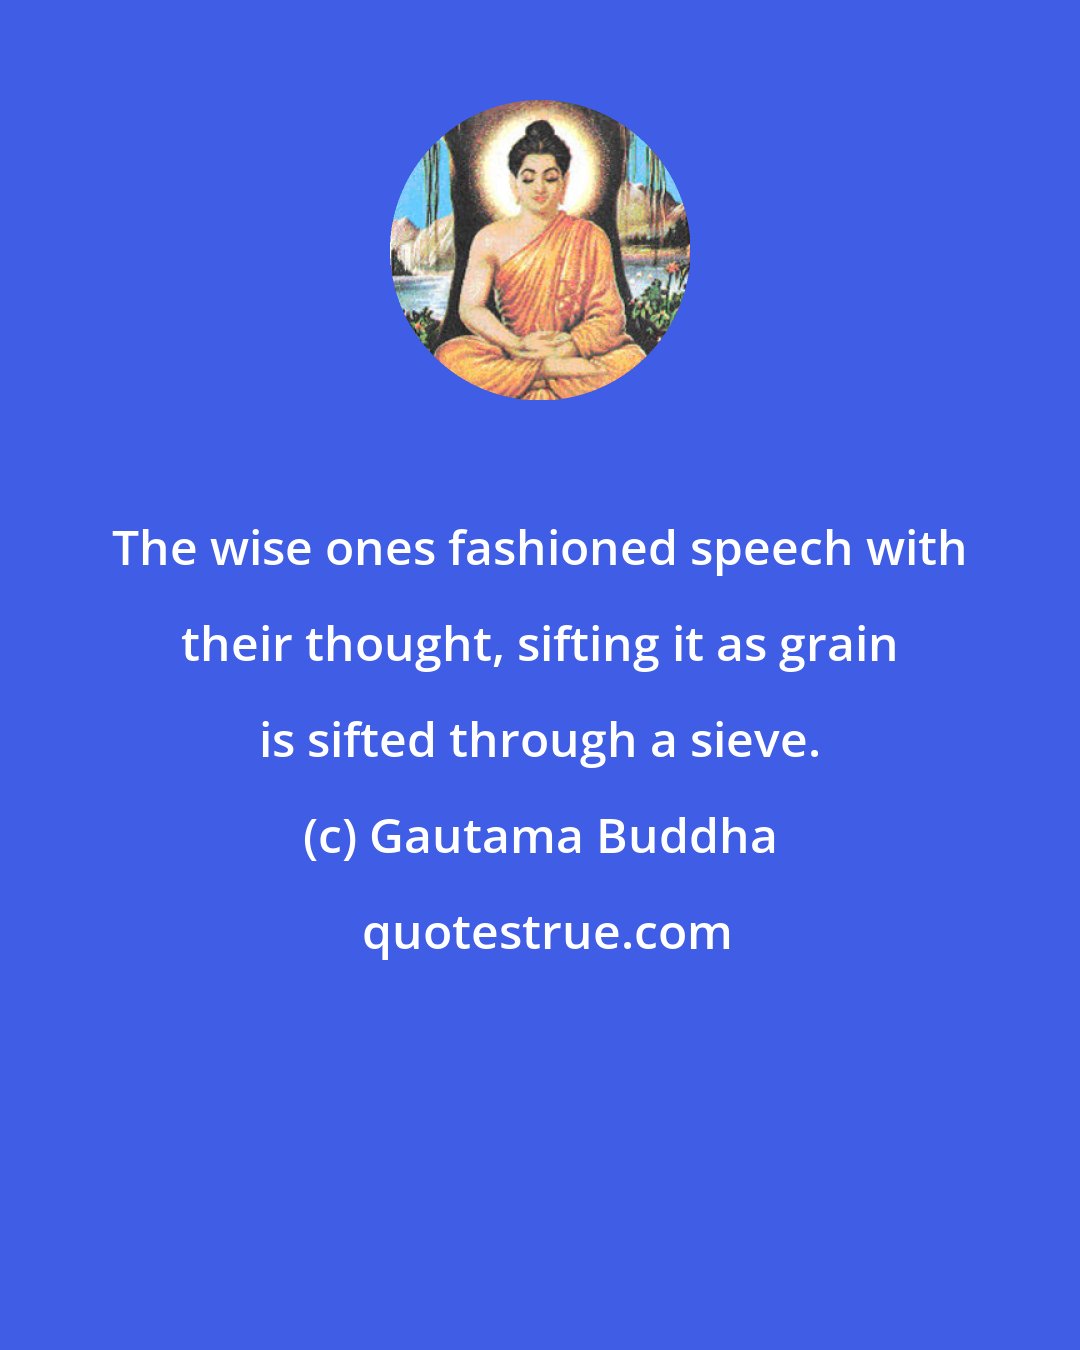 Gautama Buddha: The wise ones fashioned speech with their thought, sifting it as grain is sifted through a sieve.